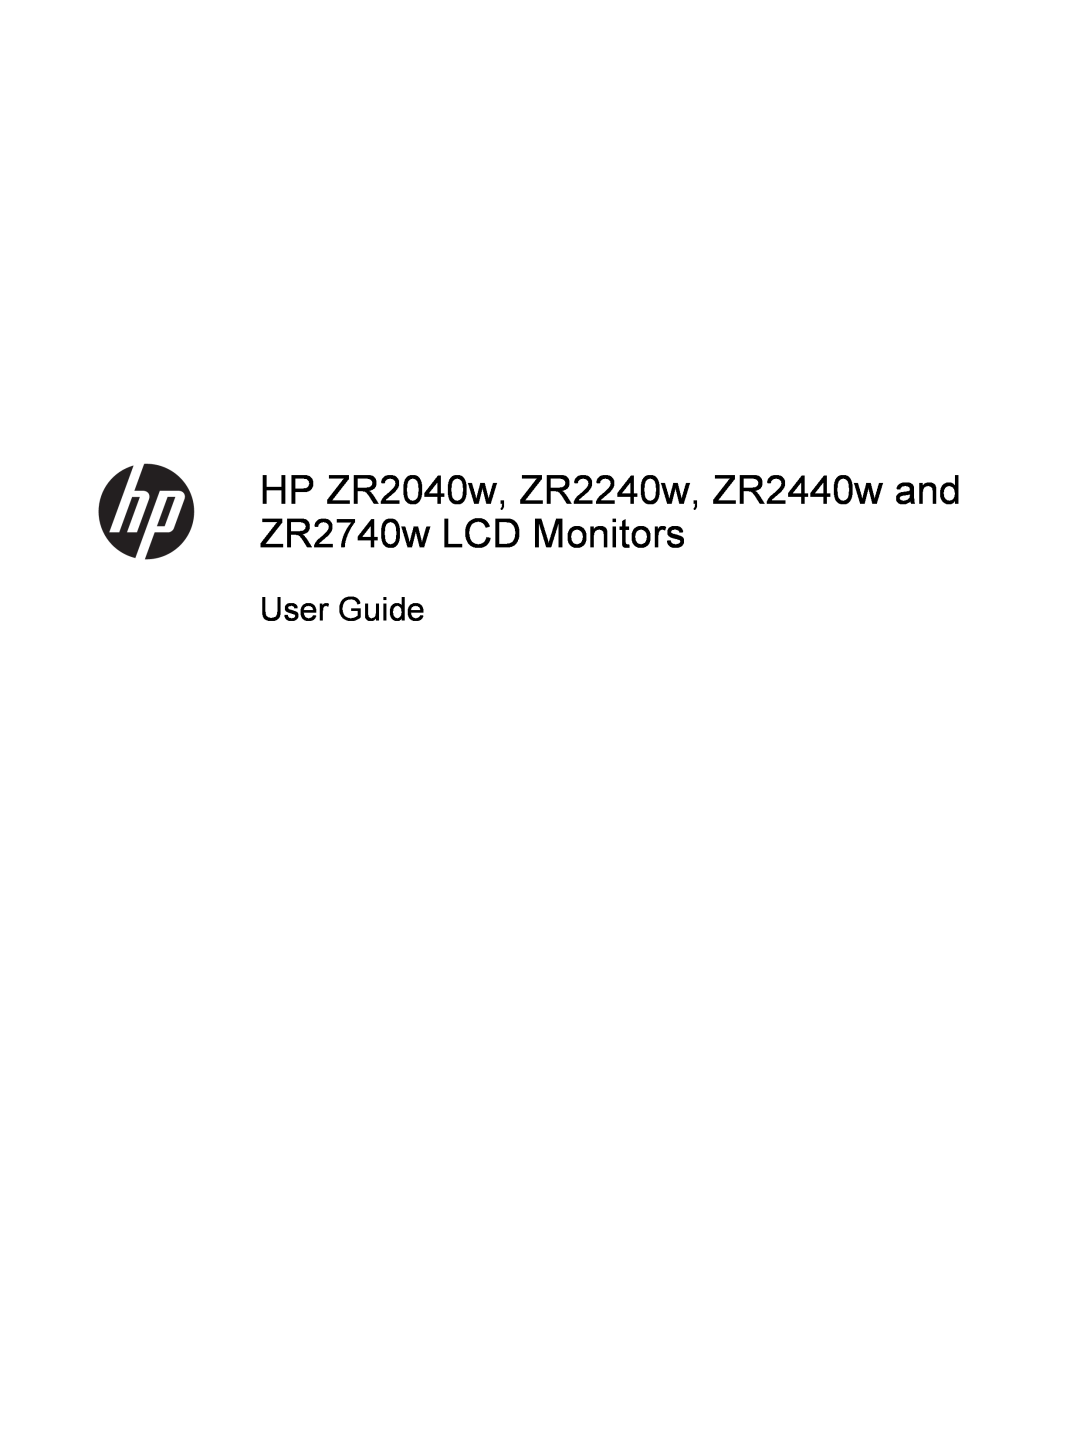 HP ZR2740w 27-inch IPS manual HP 2011 Business LCD Monitor Quick Reference Guide, See also, Product, Video, Native, Aspect 